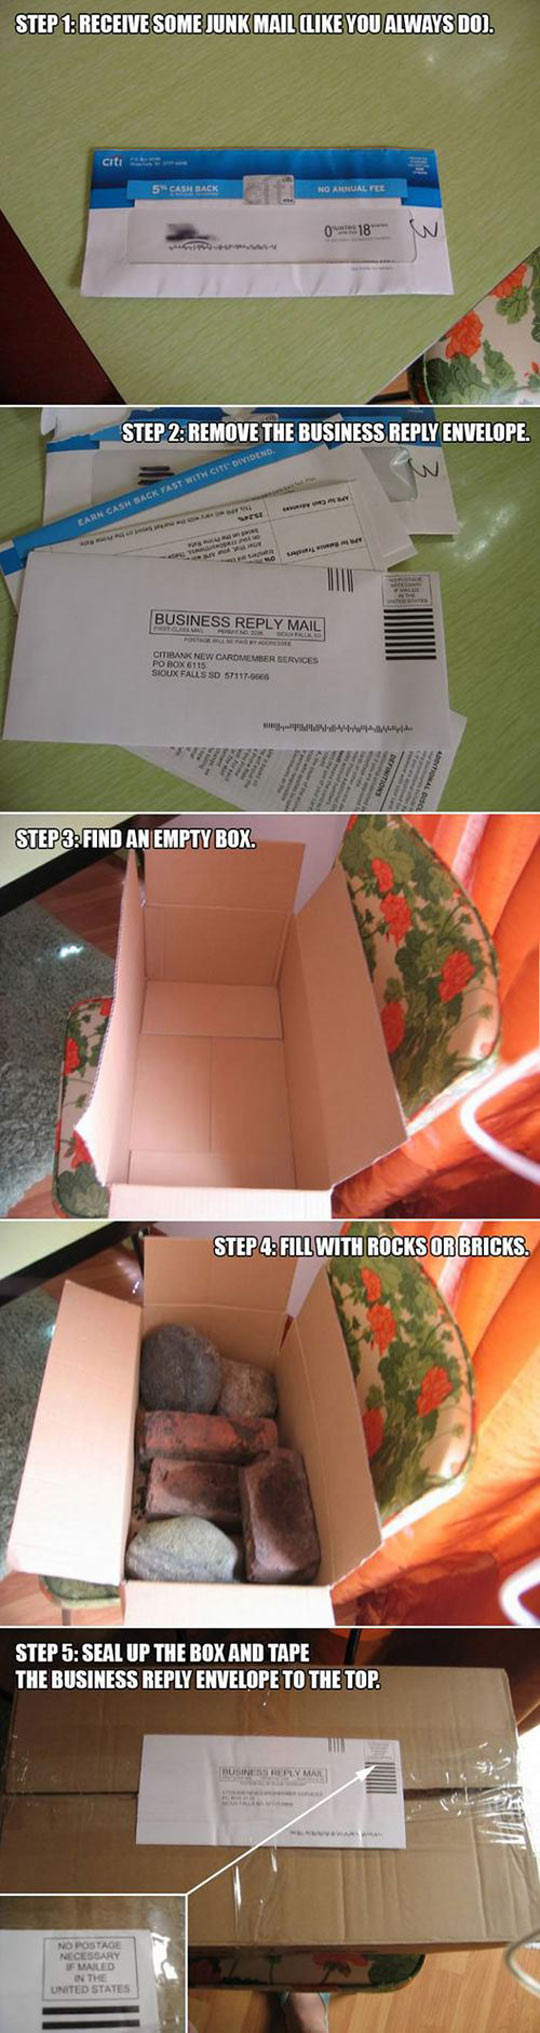 Things to do with junk mail.